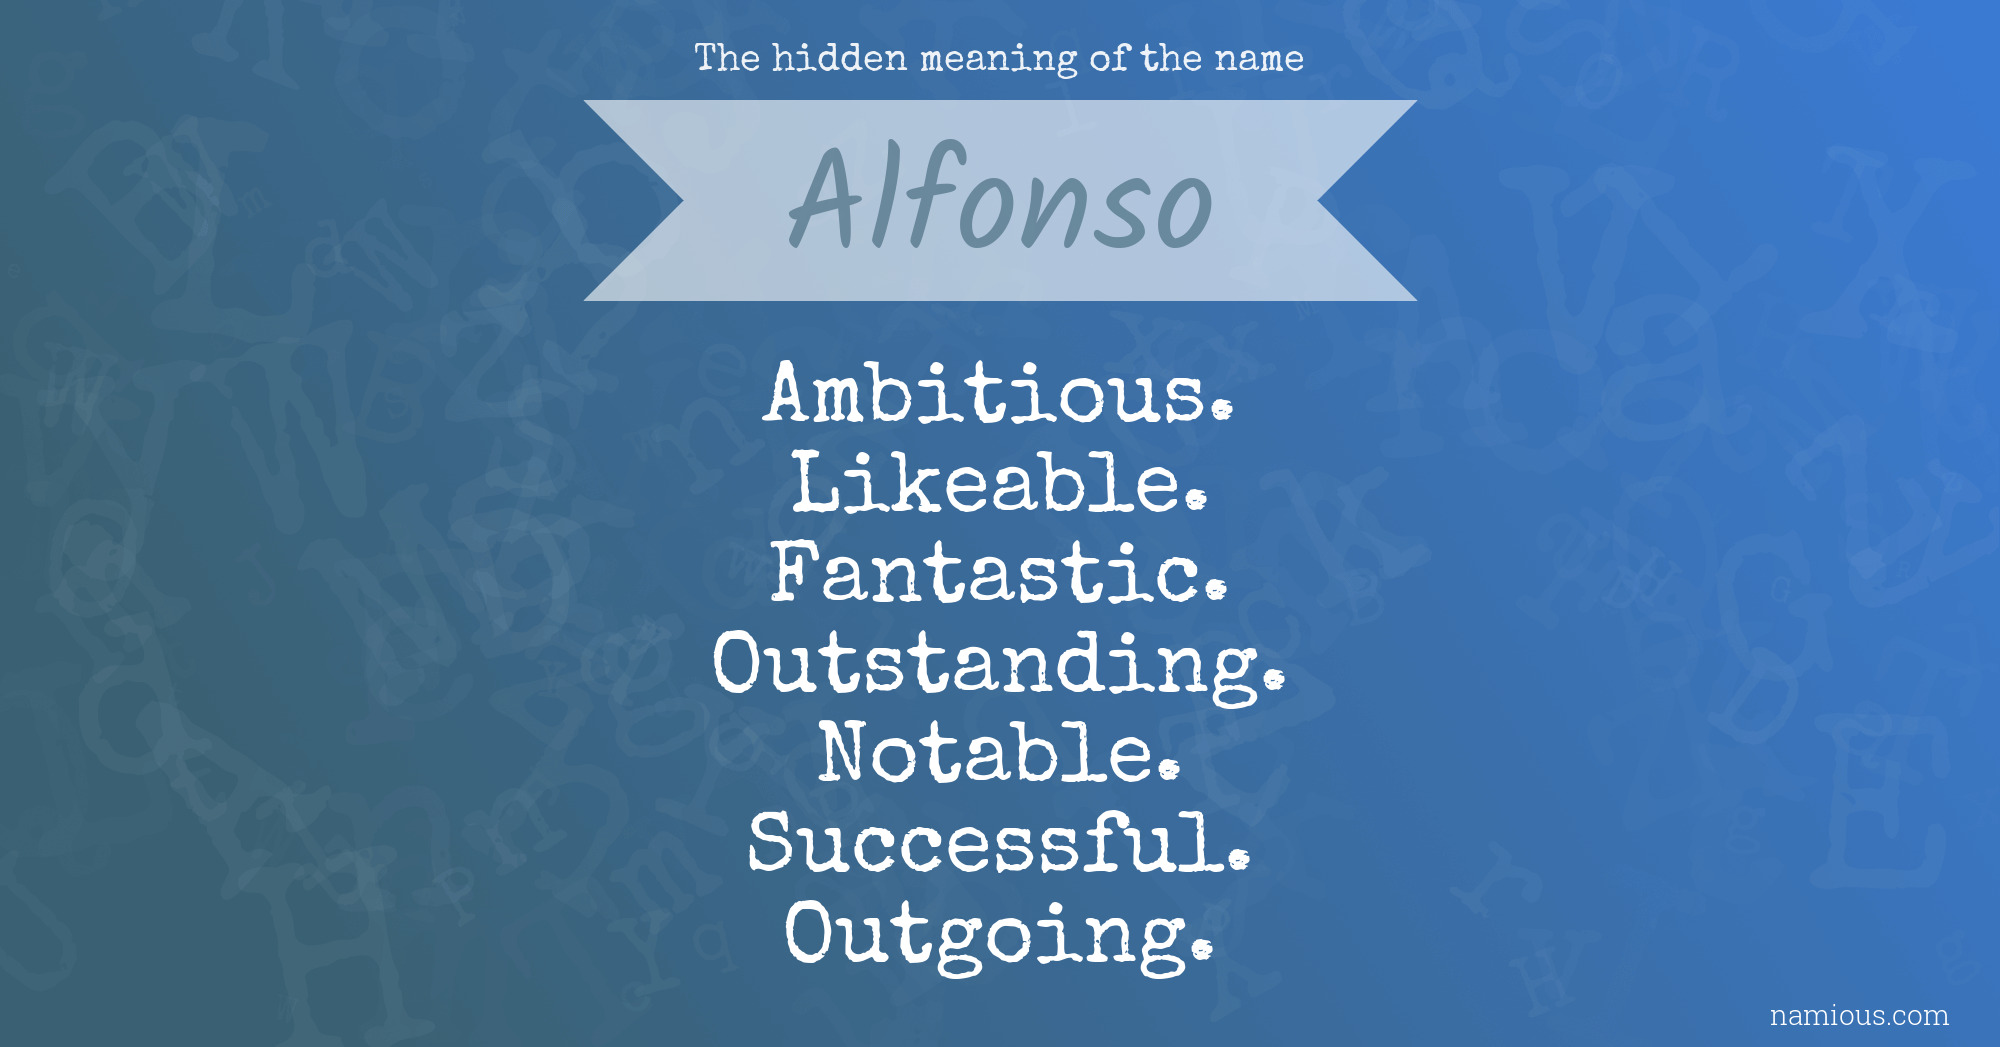 The hidden meaning of the name Alfonso